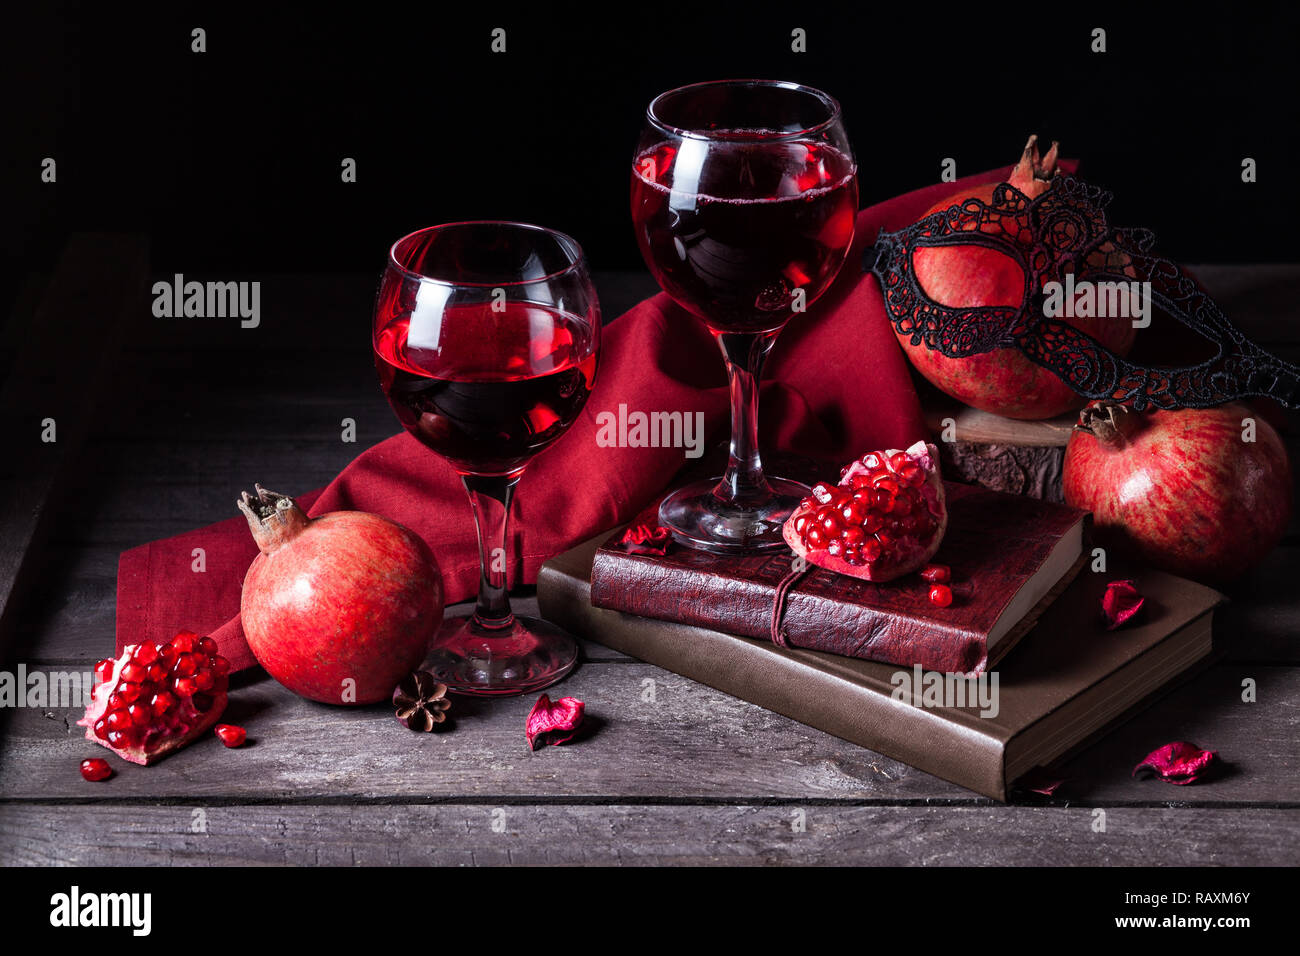 Fresh pomegranate juice in wine glasses near fruits, books and black woman mask on rustic wooden background with space for text Stock Photo